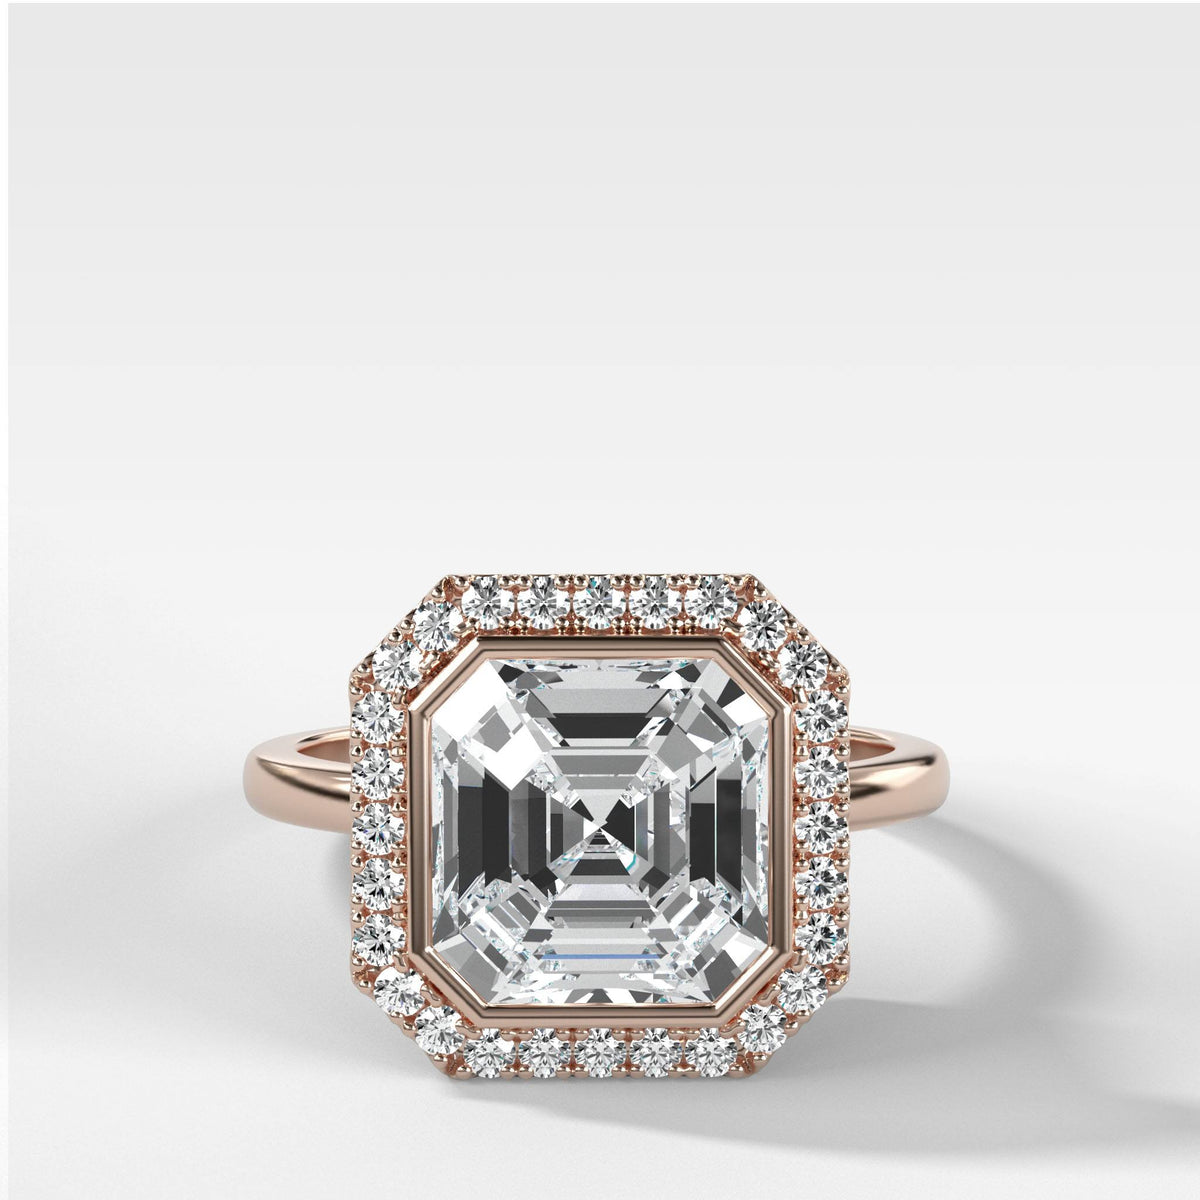 Bezel Set Halo Engagement Ring With Asscher Cut by Good Stone in Rose Gold